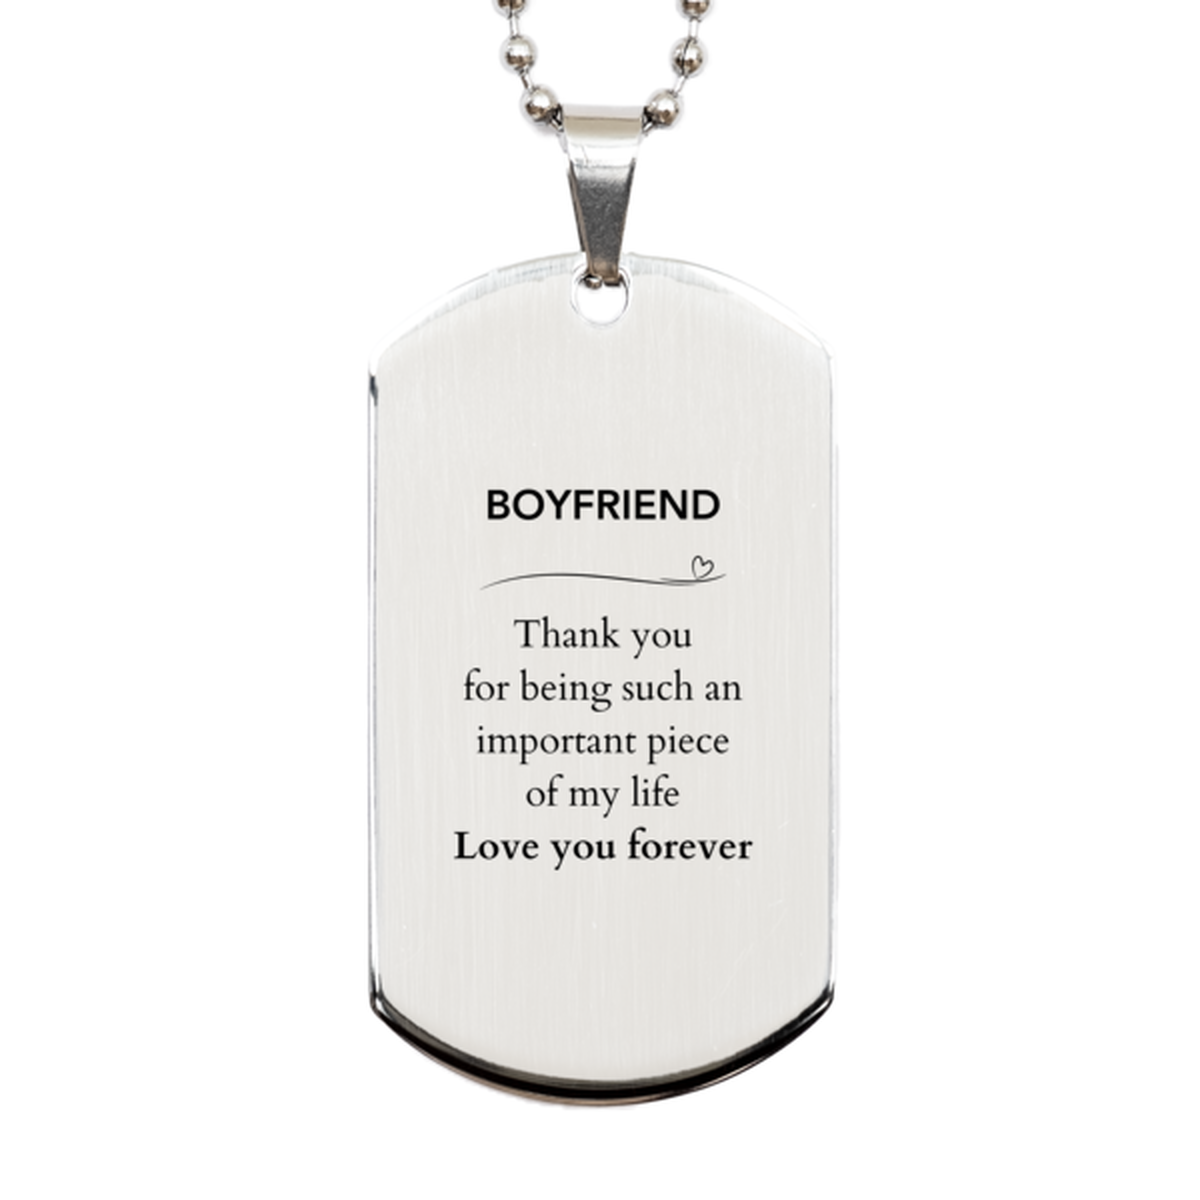 Appropriate Boyfriend Silver Dog Tag Epic Birthday Gifts for Boyfriend Thank you for being such an important piece of my life Boyfriend Christmas Mothers Fathers Day